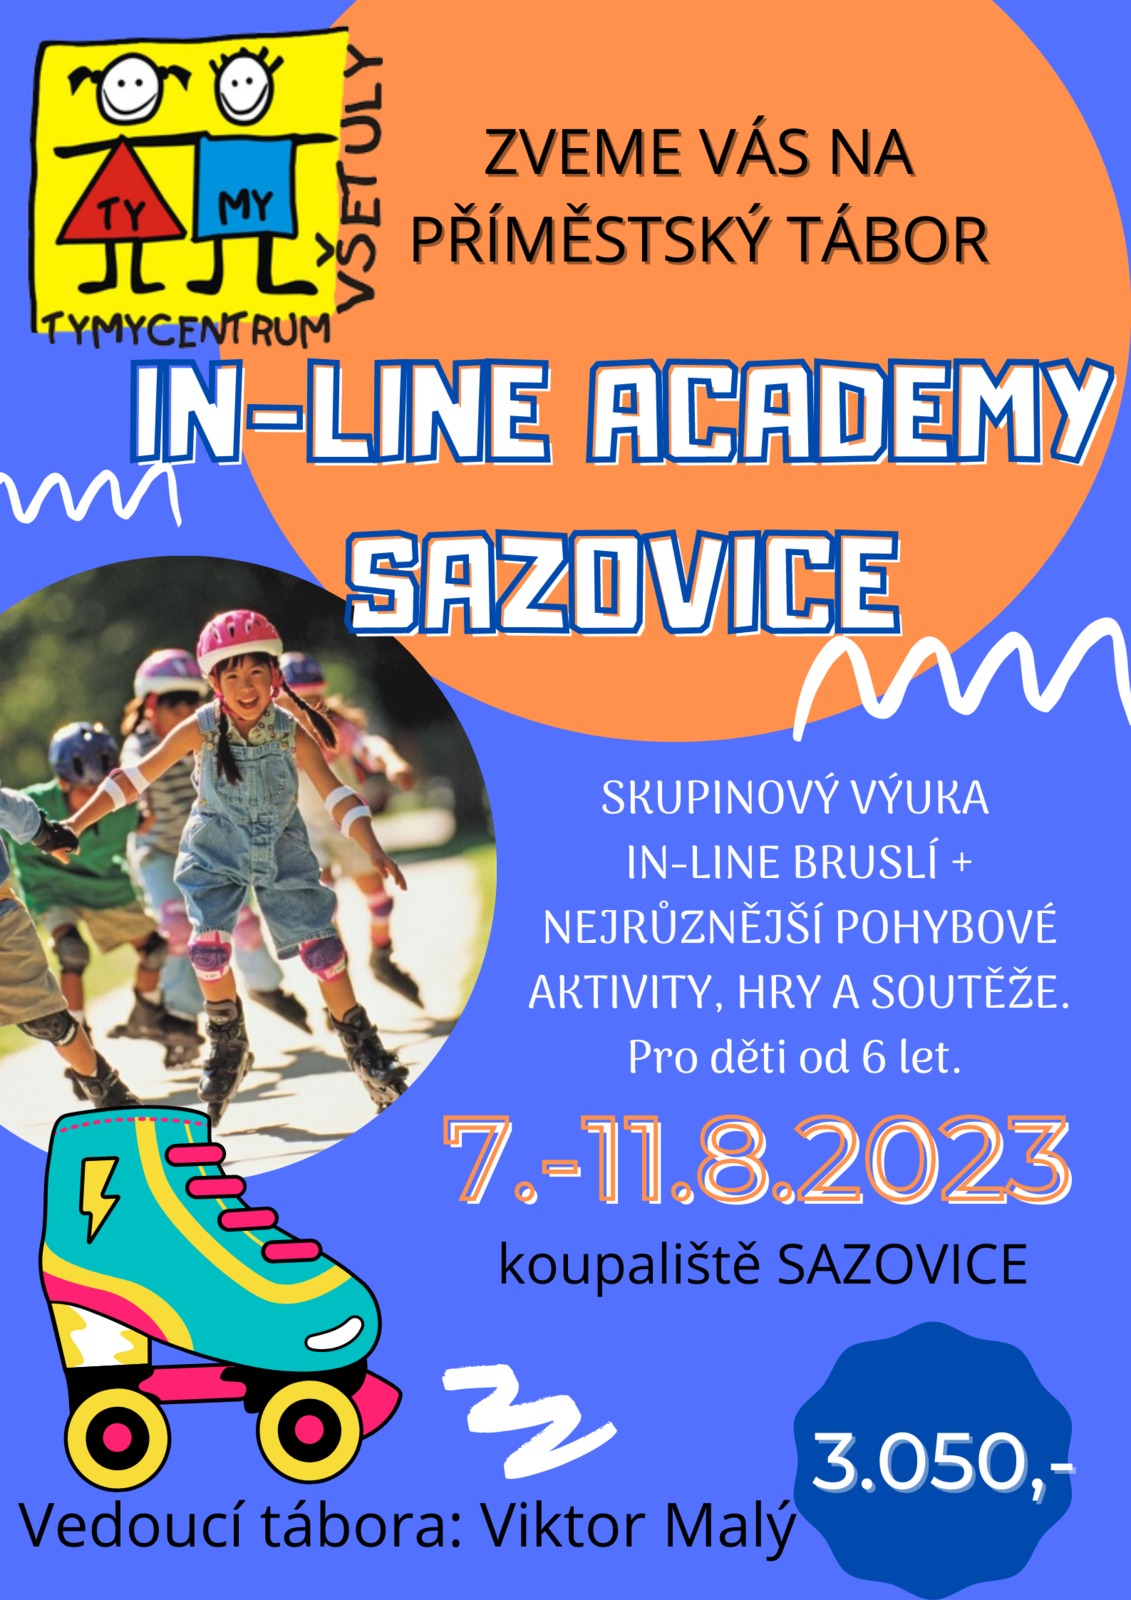 in-line academy sazovice.png